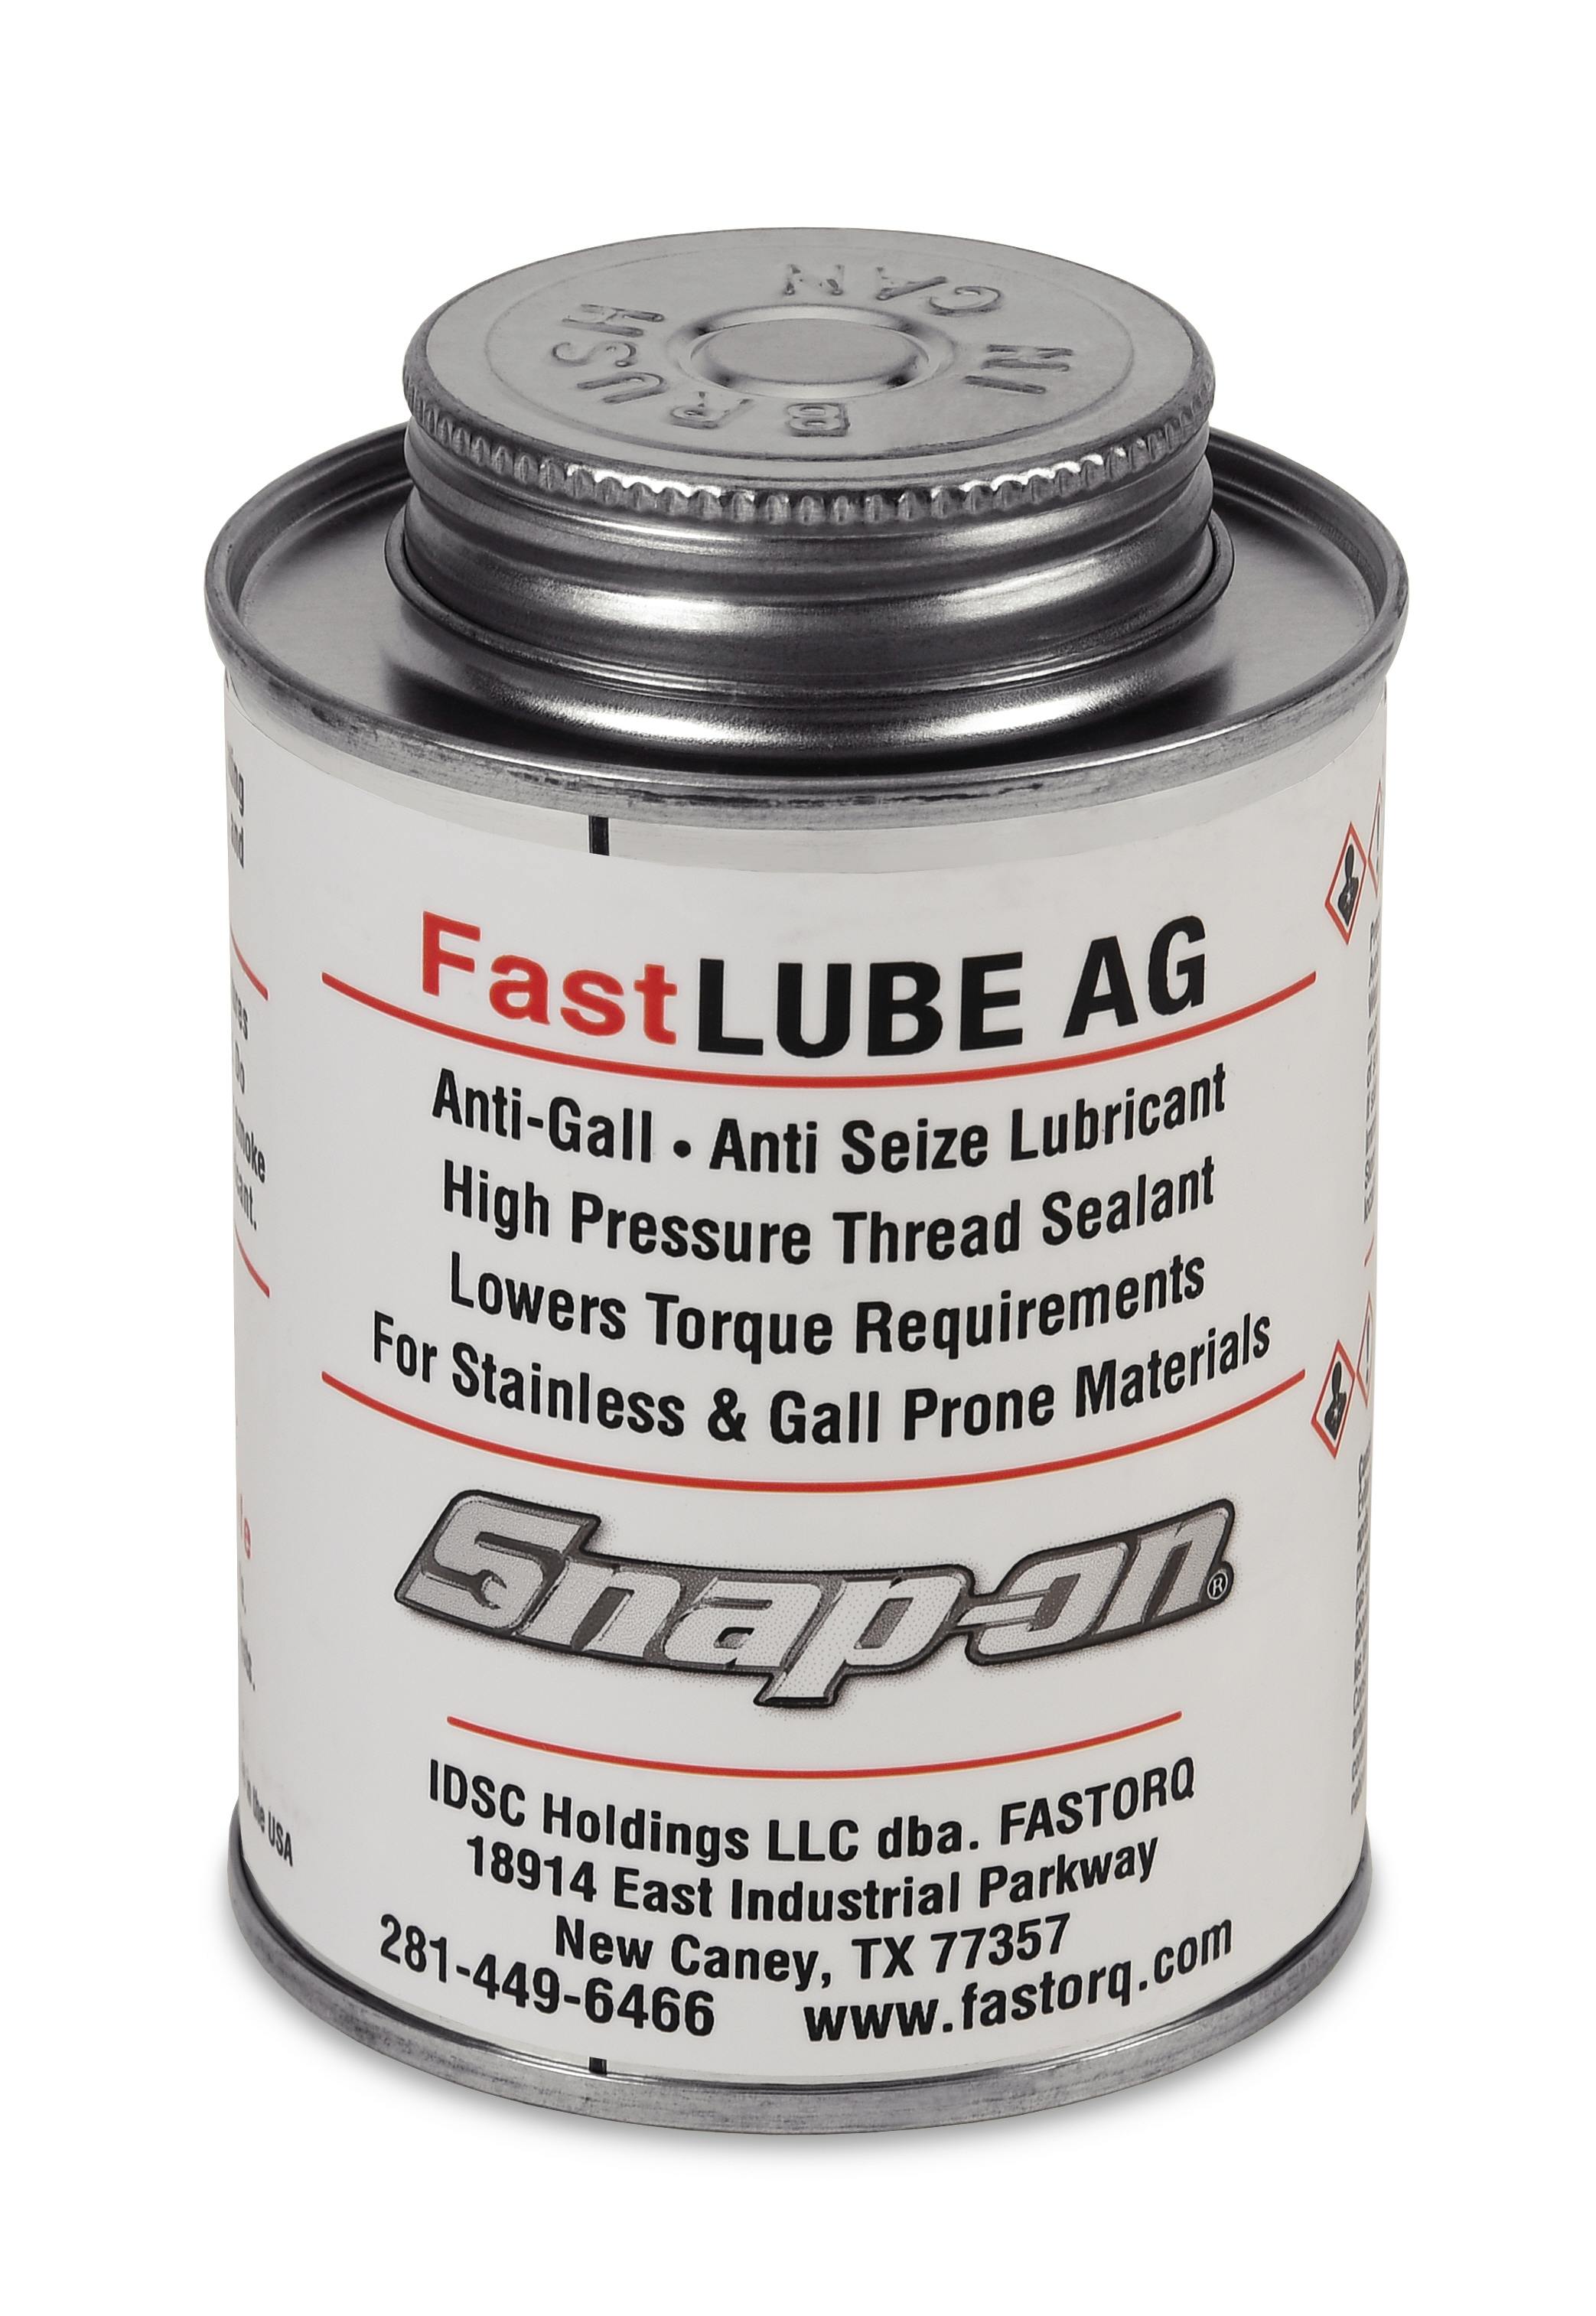 FastLUBE AG Brush Tip Can, 12 oz - Case - Snap-on Industrial